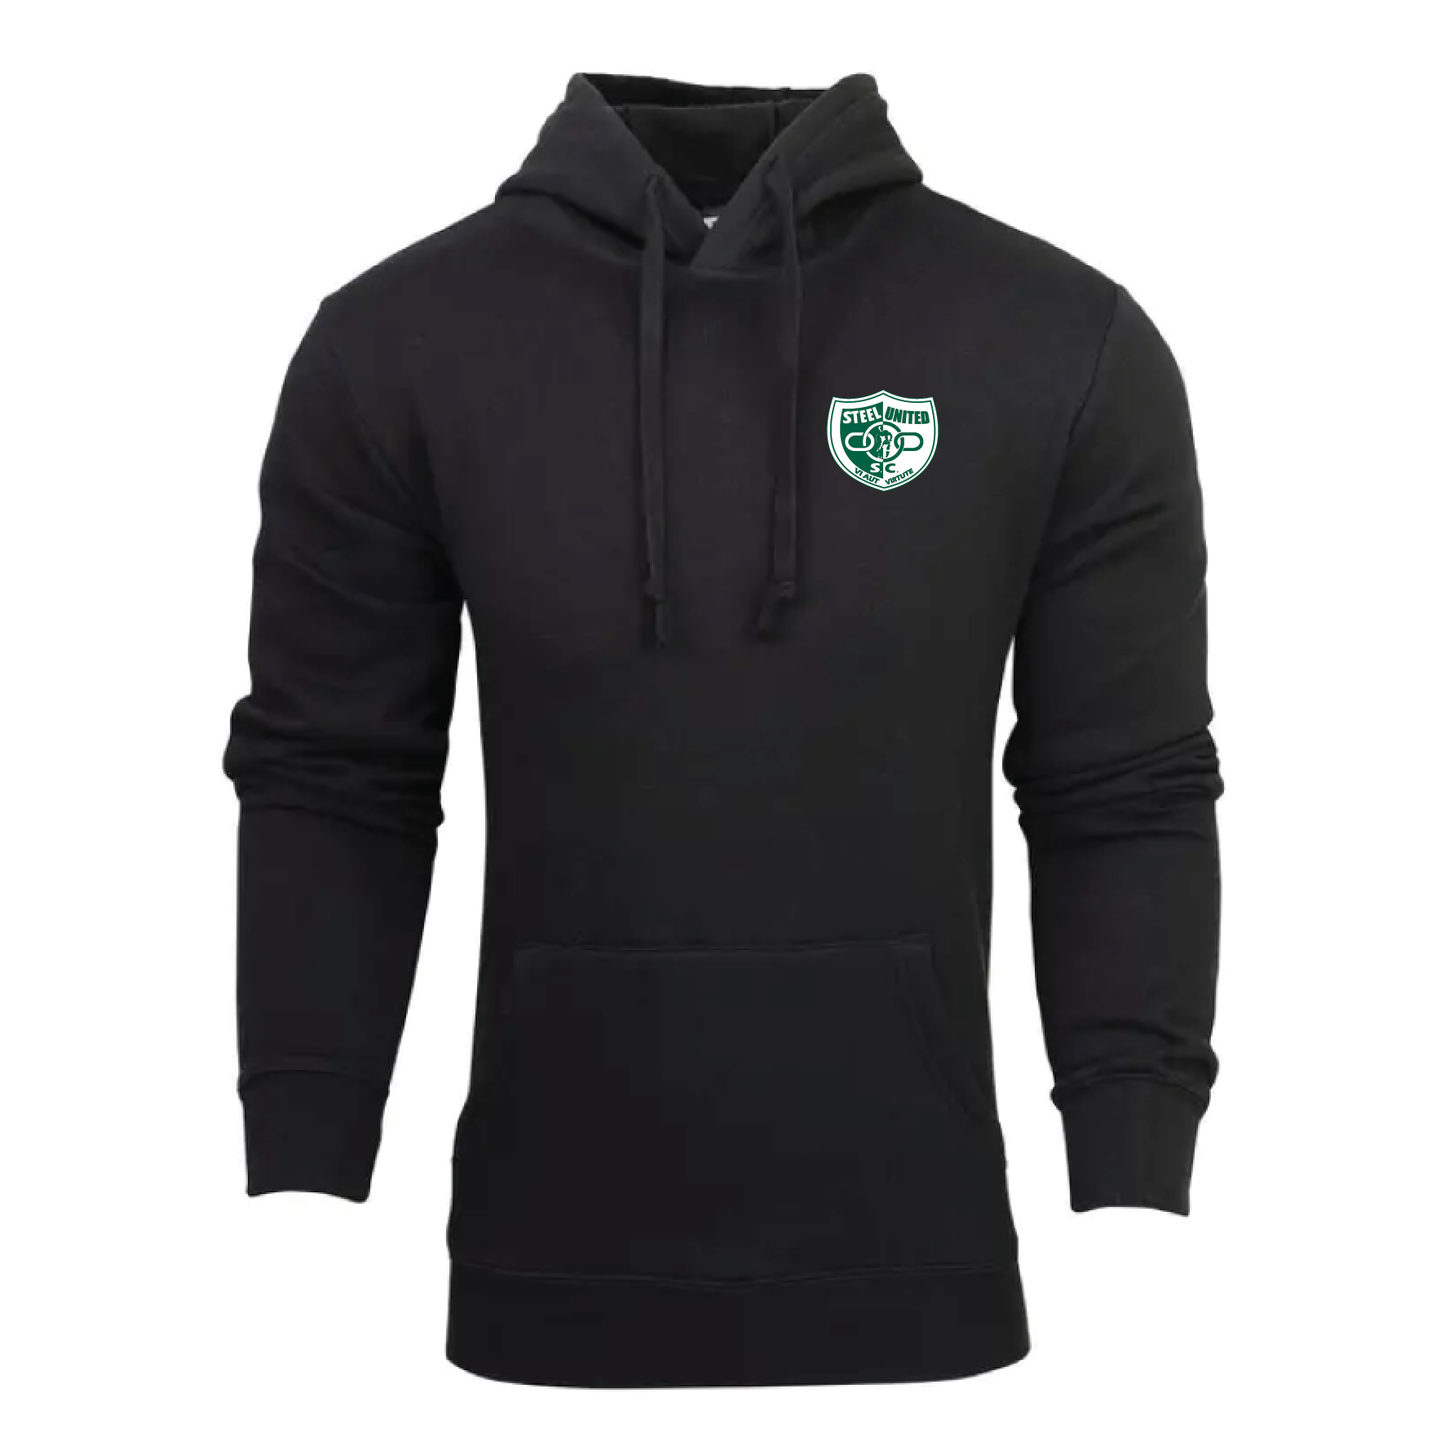 STEEL UNITED SUPPORTER HOODED SWEAT (JUNIOR SIZES ONLY)